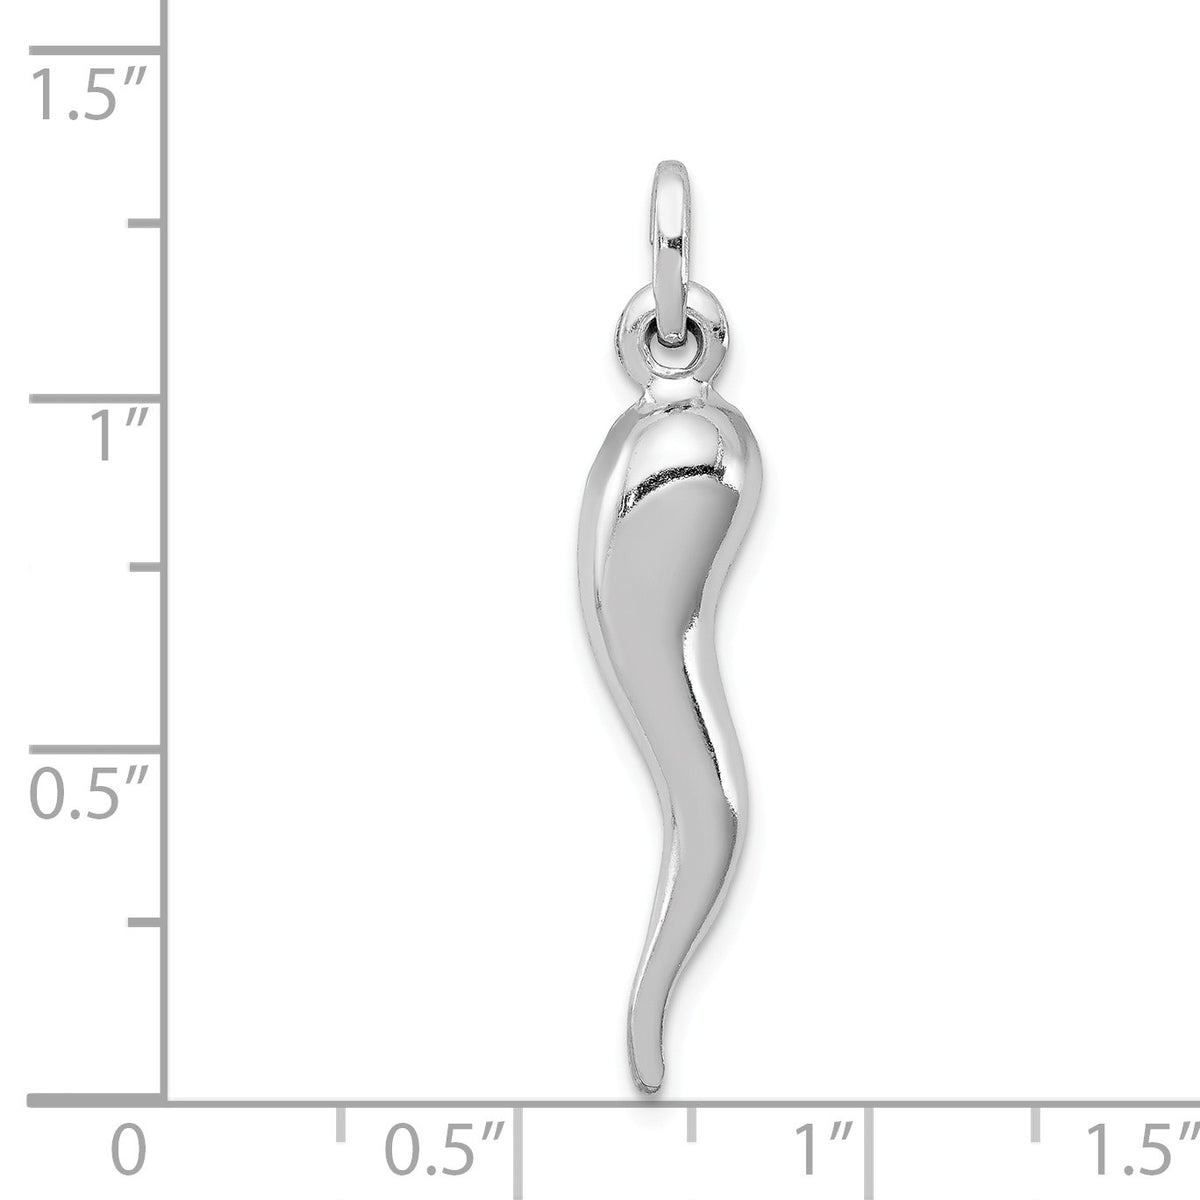 Alternate view of the Rhodium Plated Sterling Silver Large 3D Italian Horn Pendant, 7 x 35mm by The Black Bow Jewelry Co.